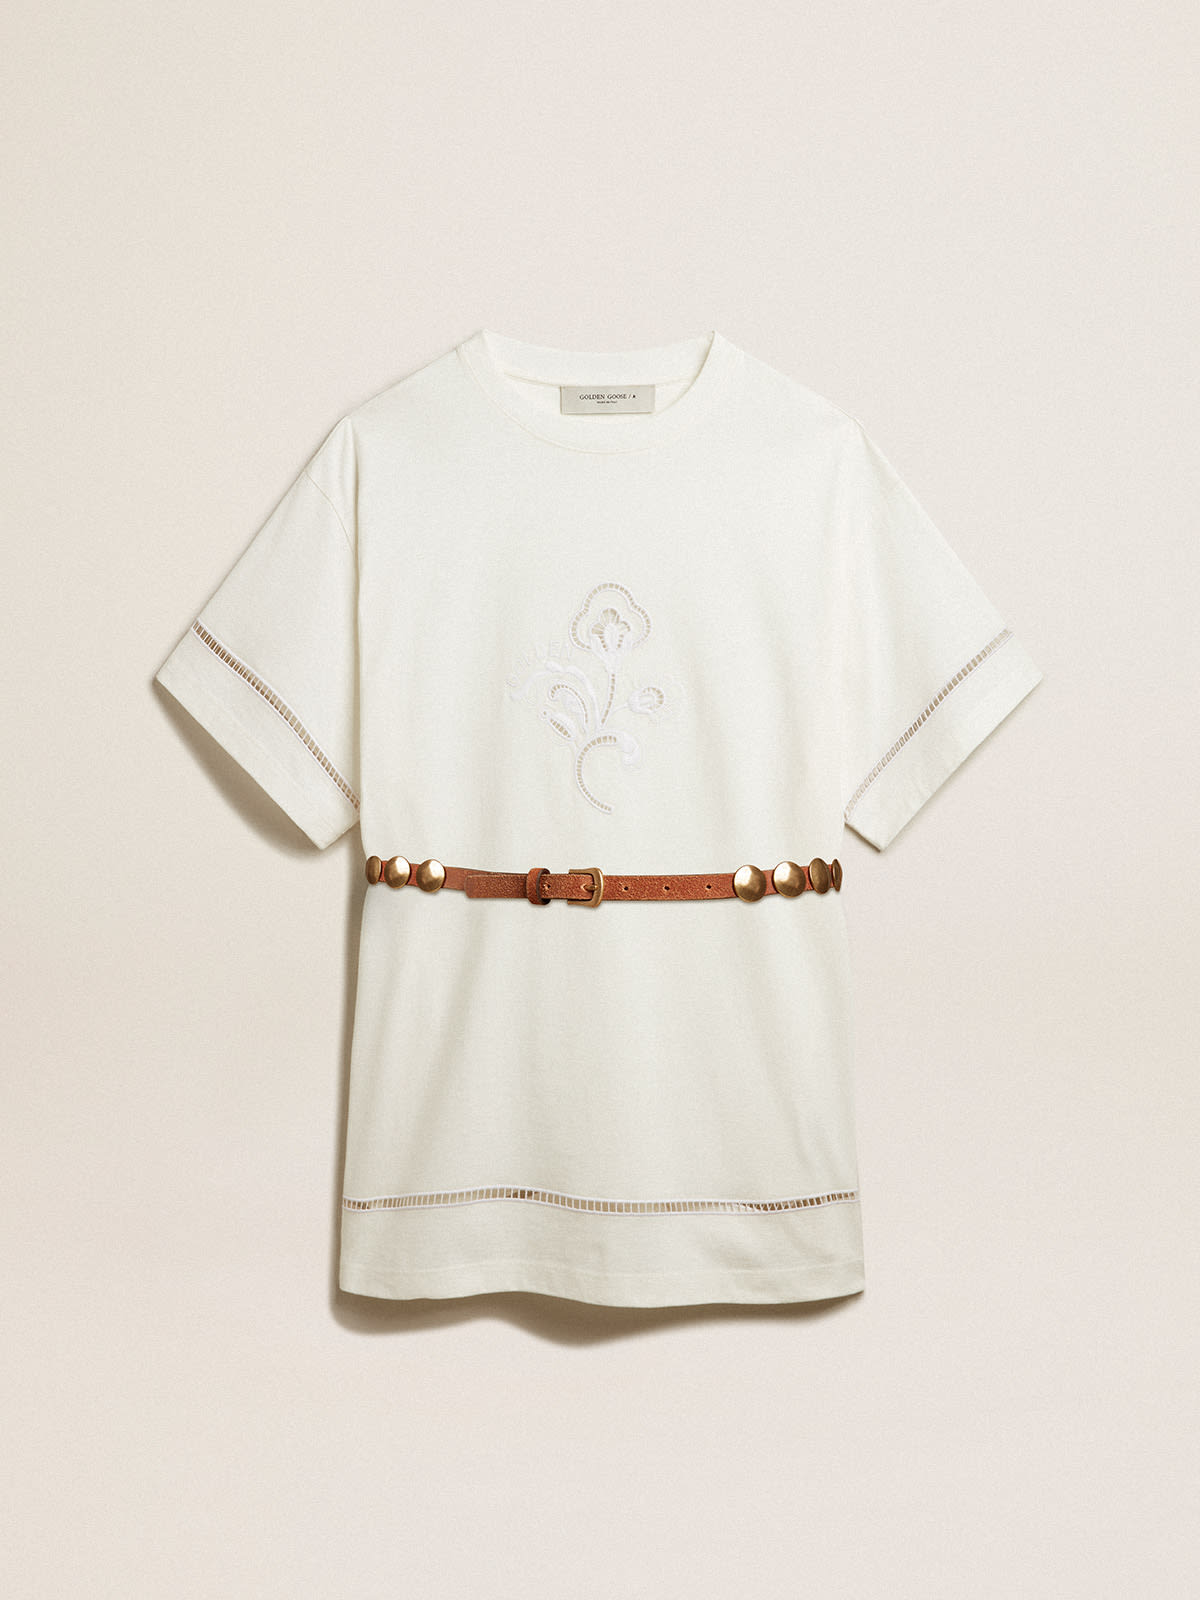 Golden Goose - White cotton T-shirt dress with belt in 